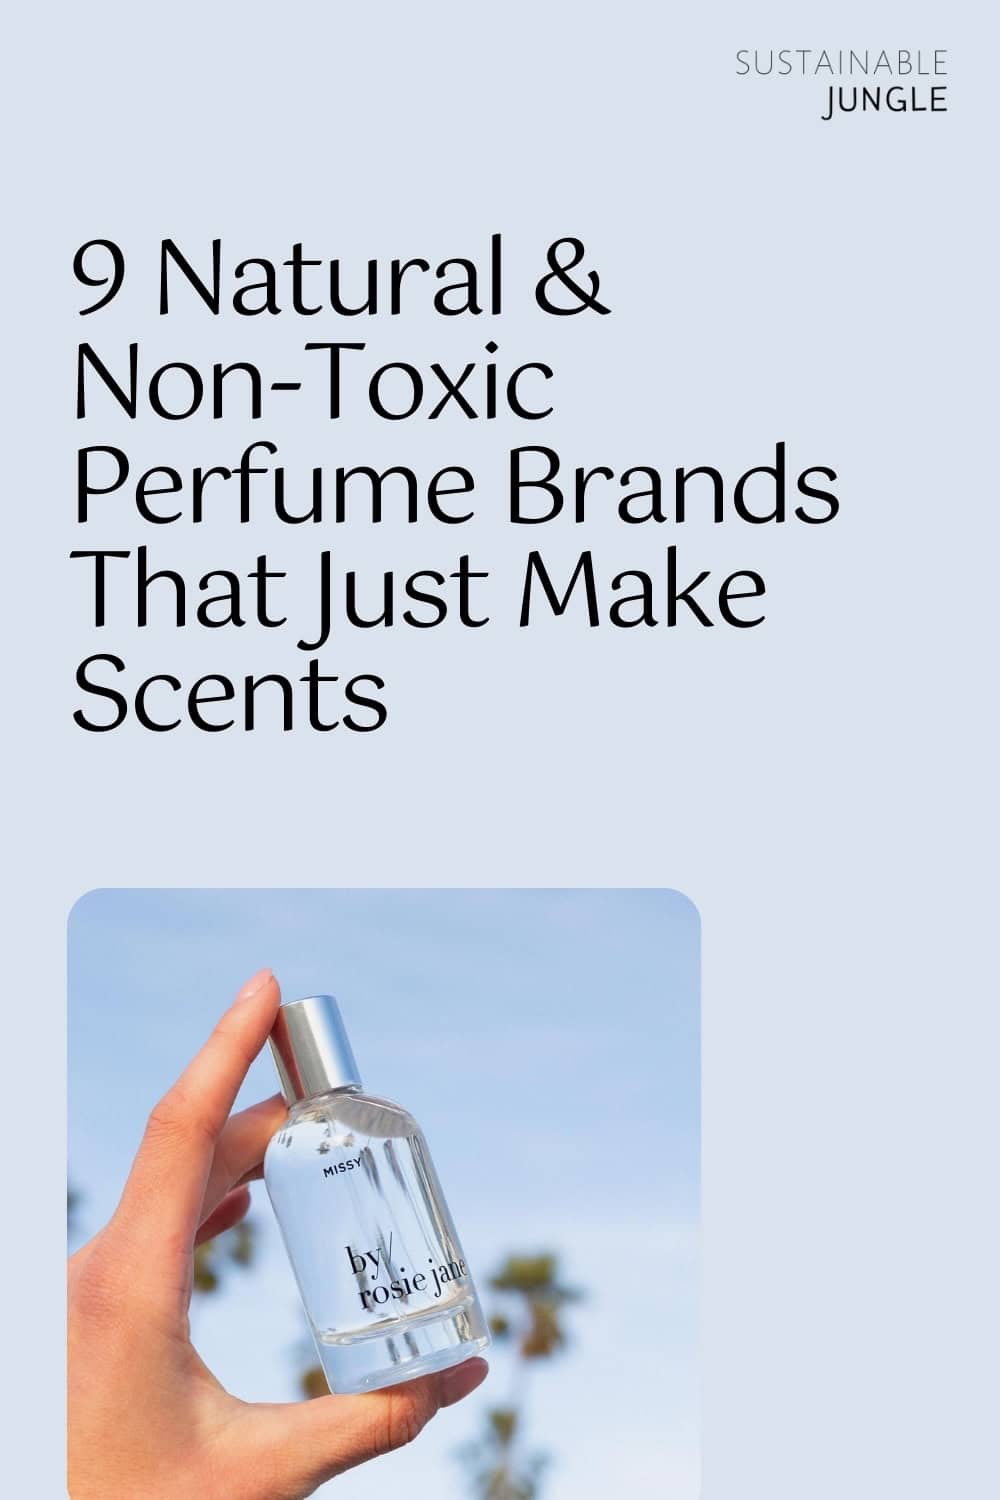 9 Non-Toxic Perfume Brands For Safe & Natural Scents Image by by/ rosie jane. #nontoxicperfume #nontoxicfragrance #nontoxicperfumebrands #naturalperfume #naturalorganicperfume #sustainablejungle